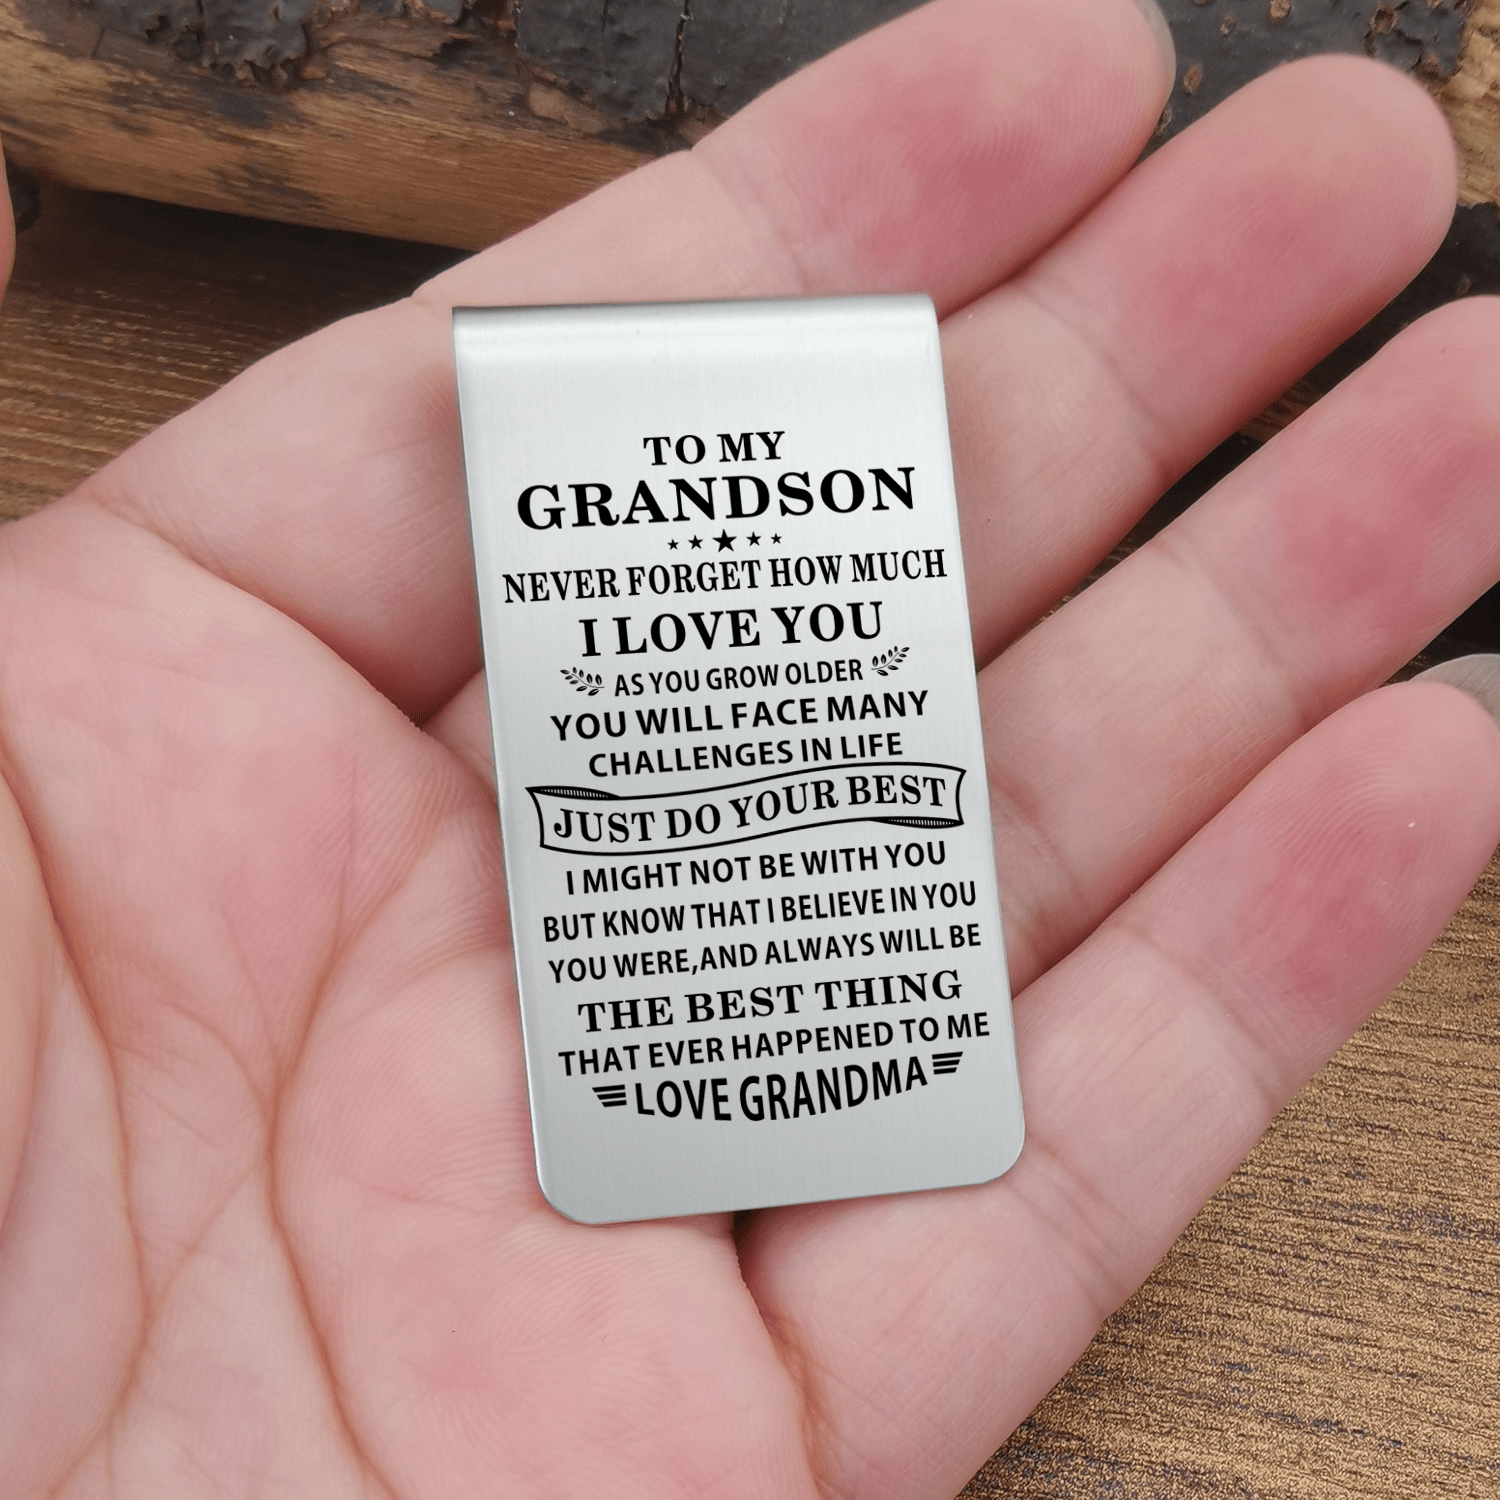 Money Clips For Grandson Grandma To Grandson - Just Do Your Best Engraved Money Clip GiveMe-Gifts